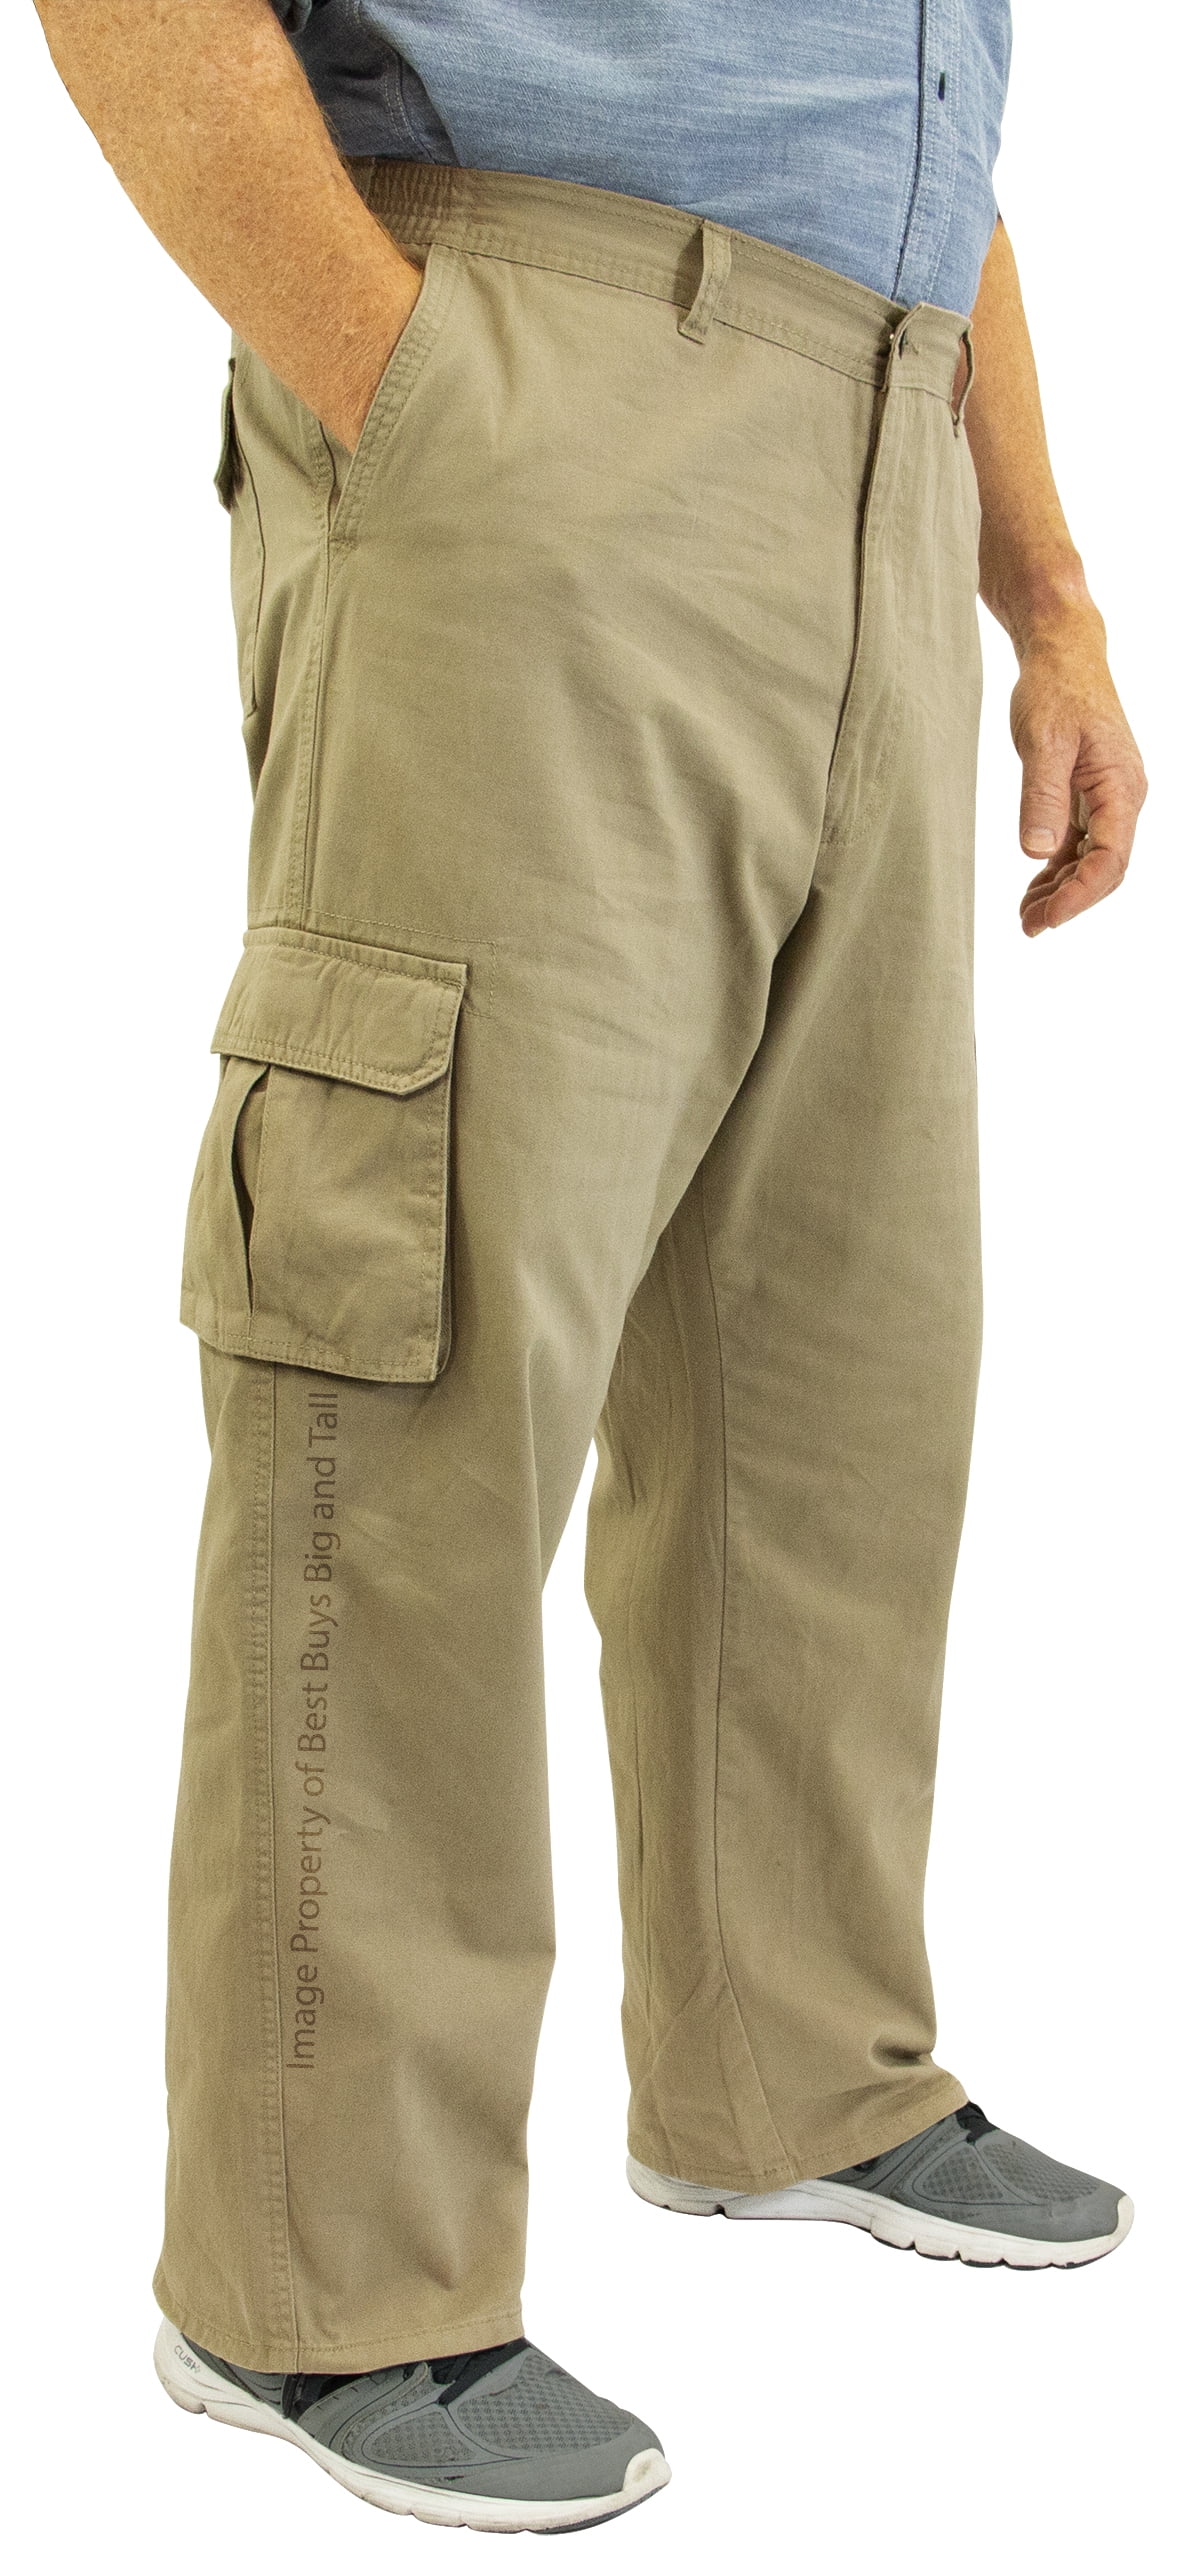 Details about   Rugged supply Big men's cargo woven pants Khaki 46x32 